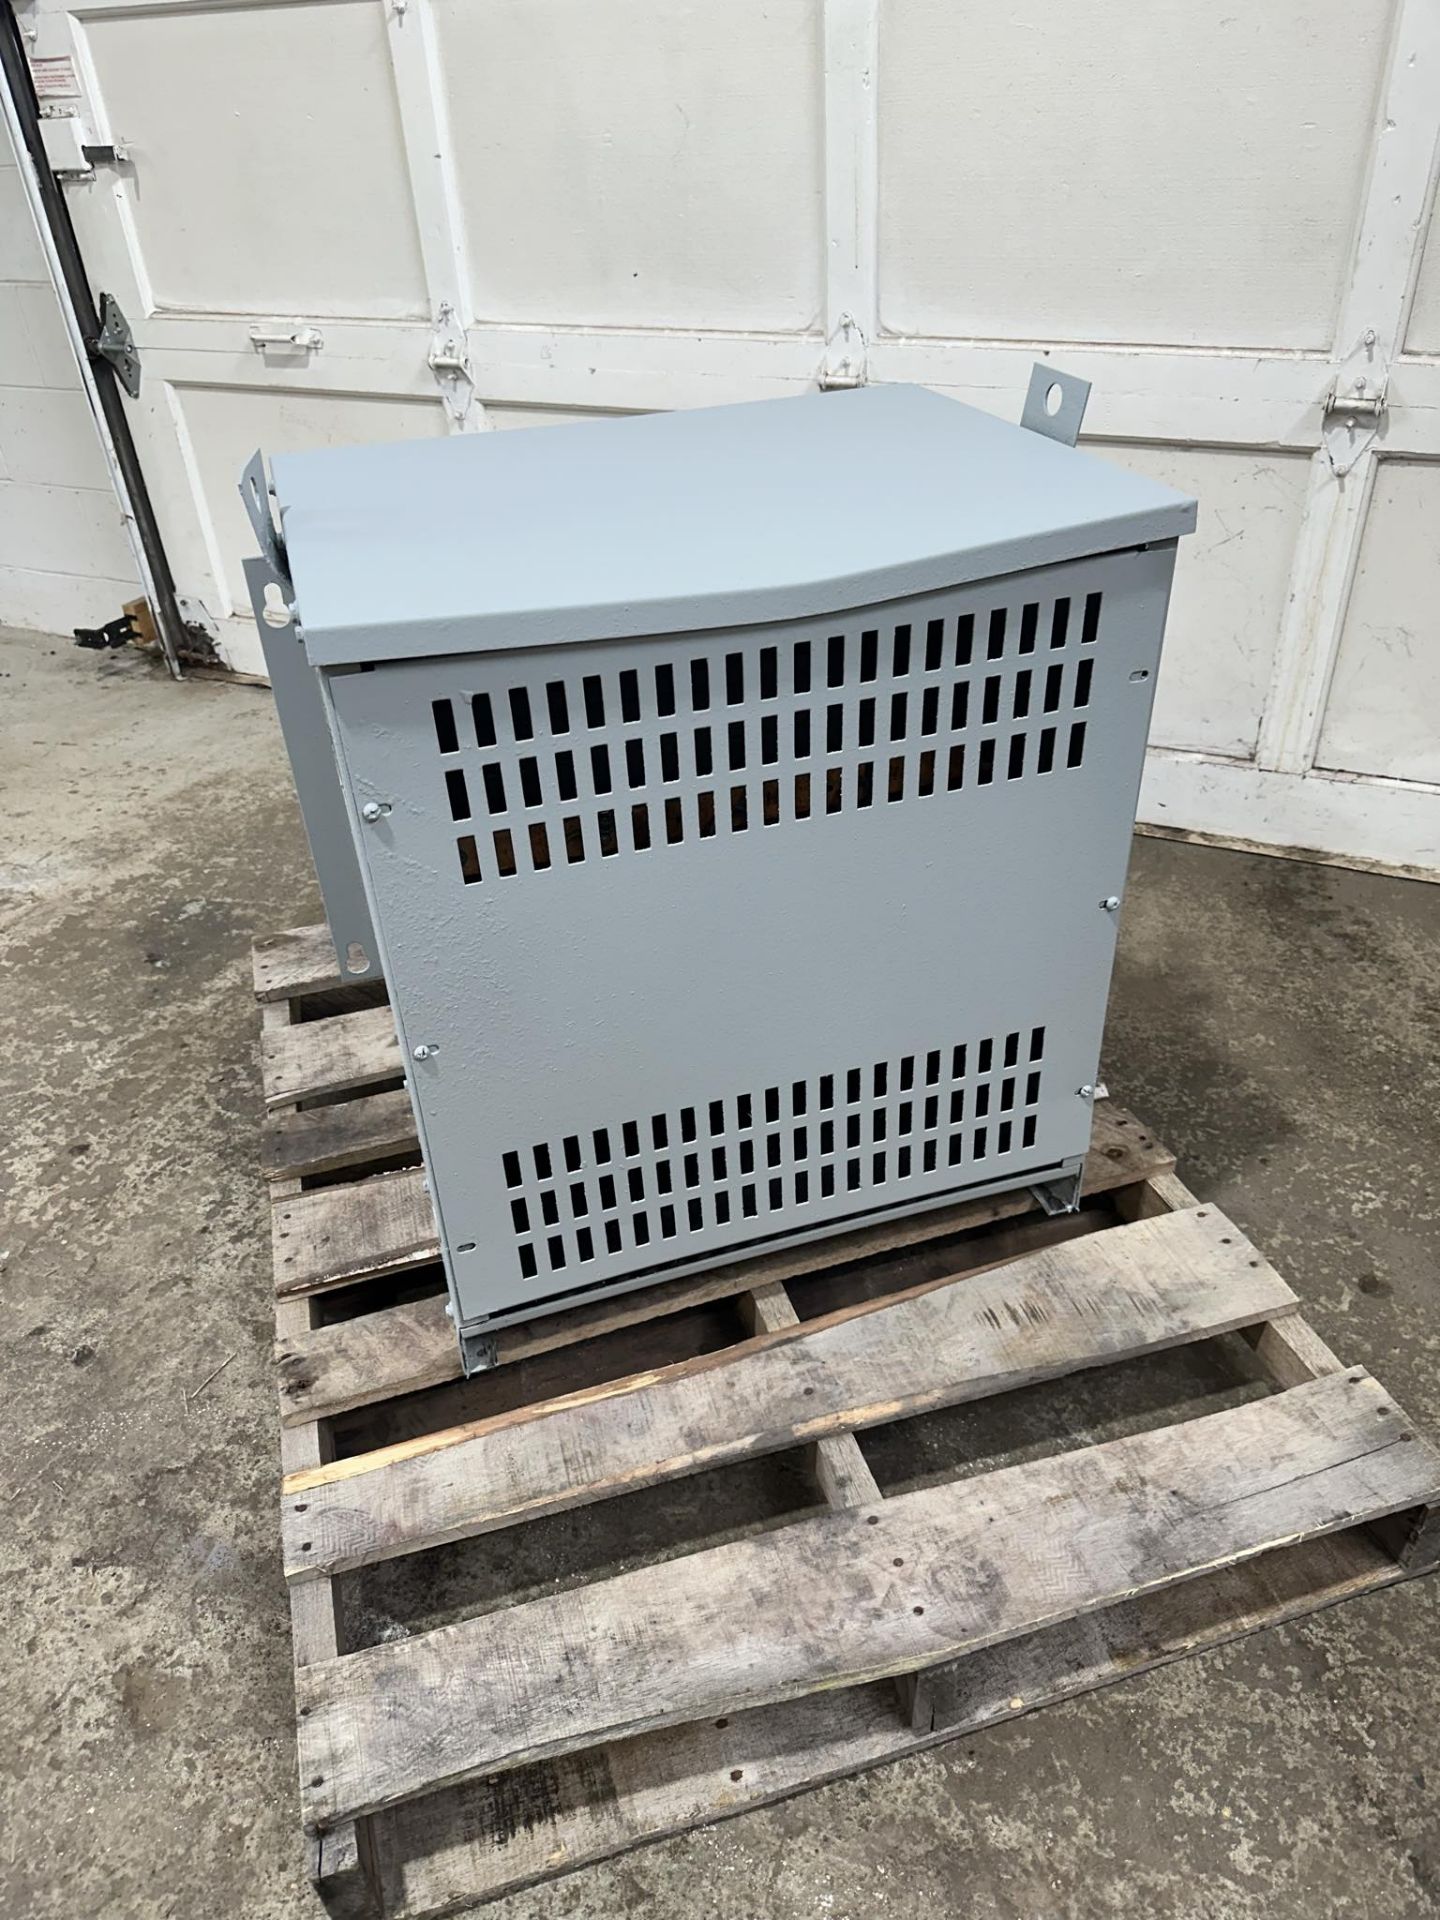 REX 45KVA TRANSFORMER, 3 PHASE, 600V TO 220Y127 (LOCATED IN BRANTFORD, ONTARIO) (RIGGING FEE $75) - Image 2 of 3